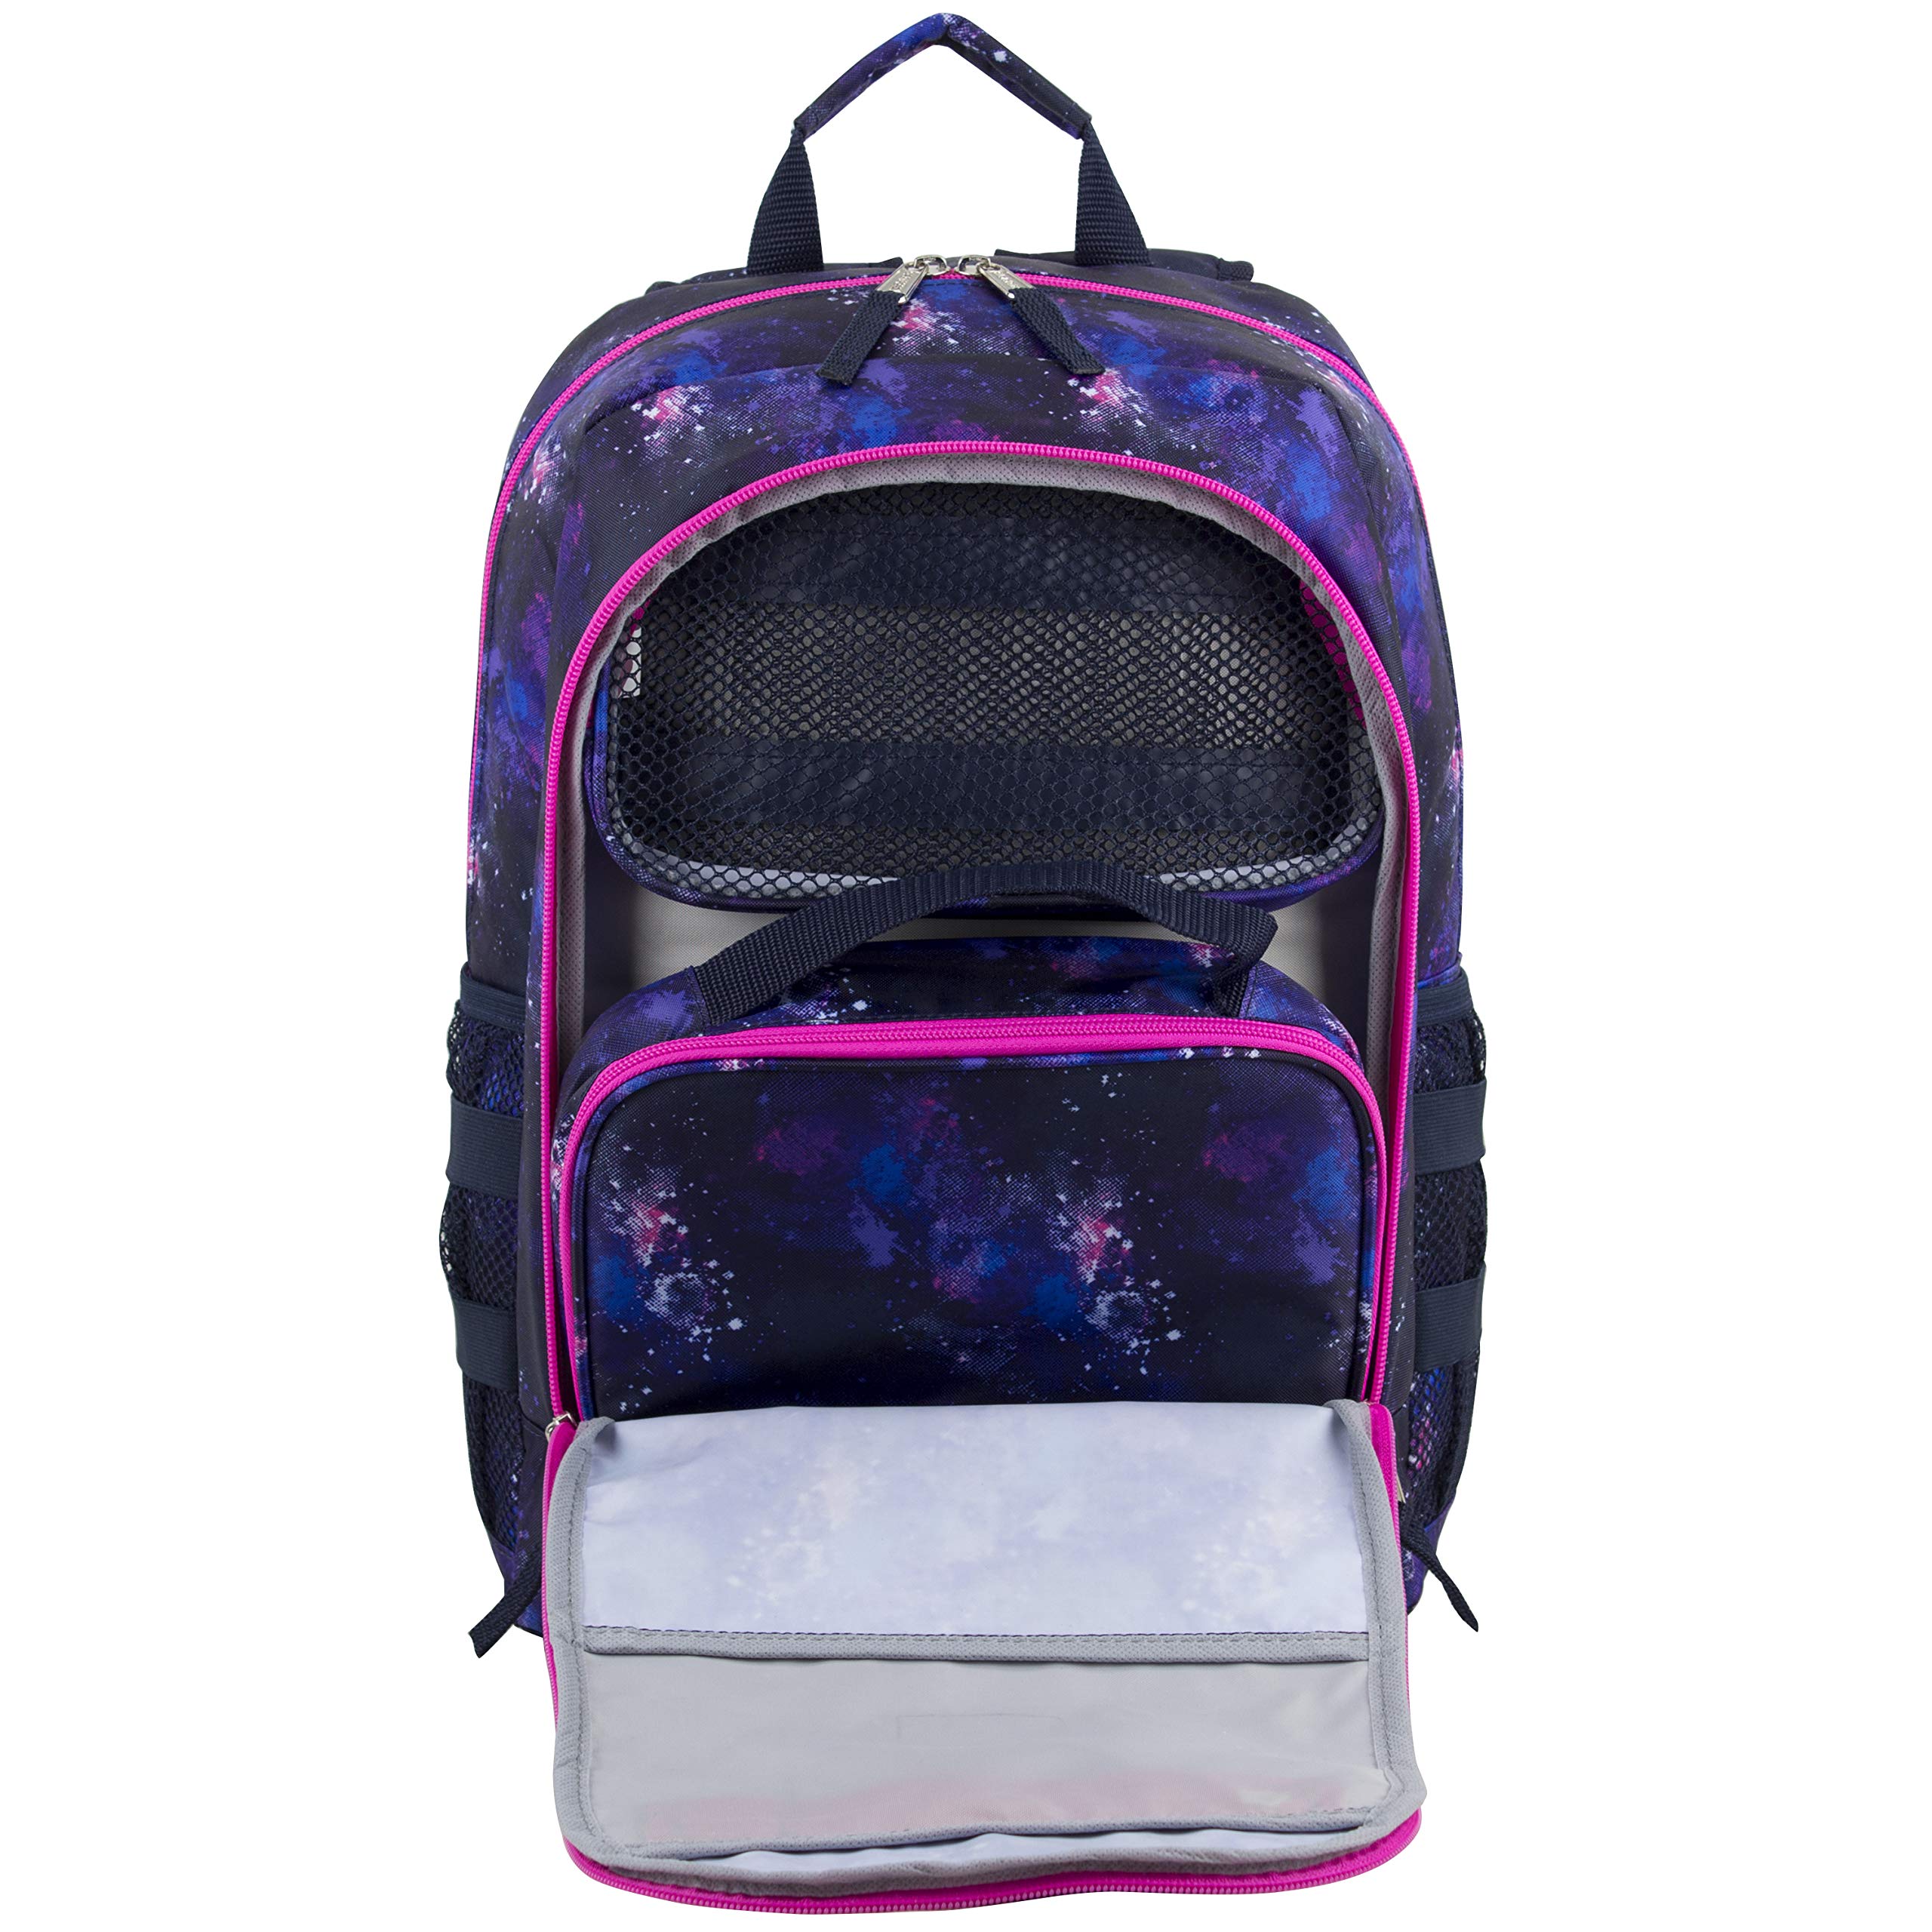 Eastsport Compact 3-Piece Combo Backpack with Lunch Box and Snack/Pencil Pouch - Purple/Pink Constellation